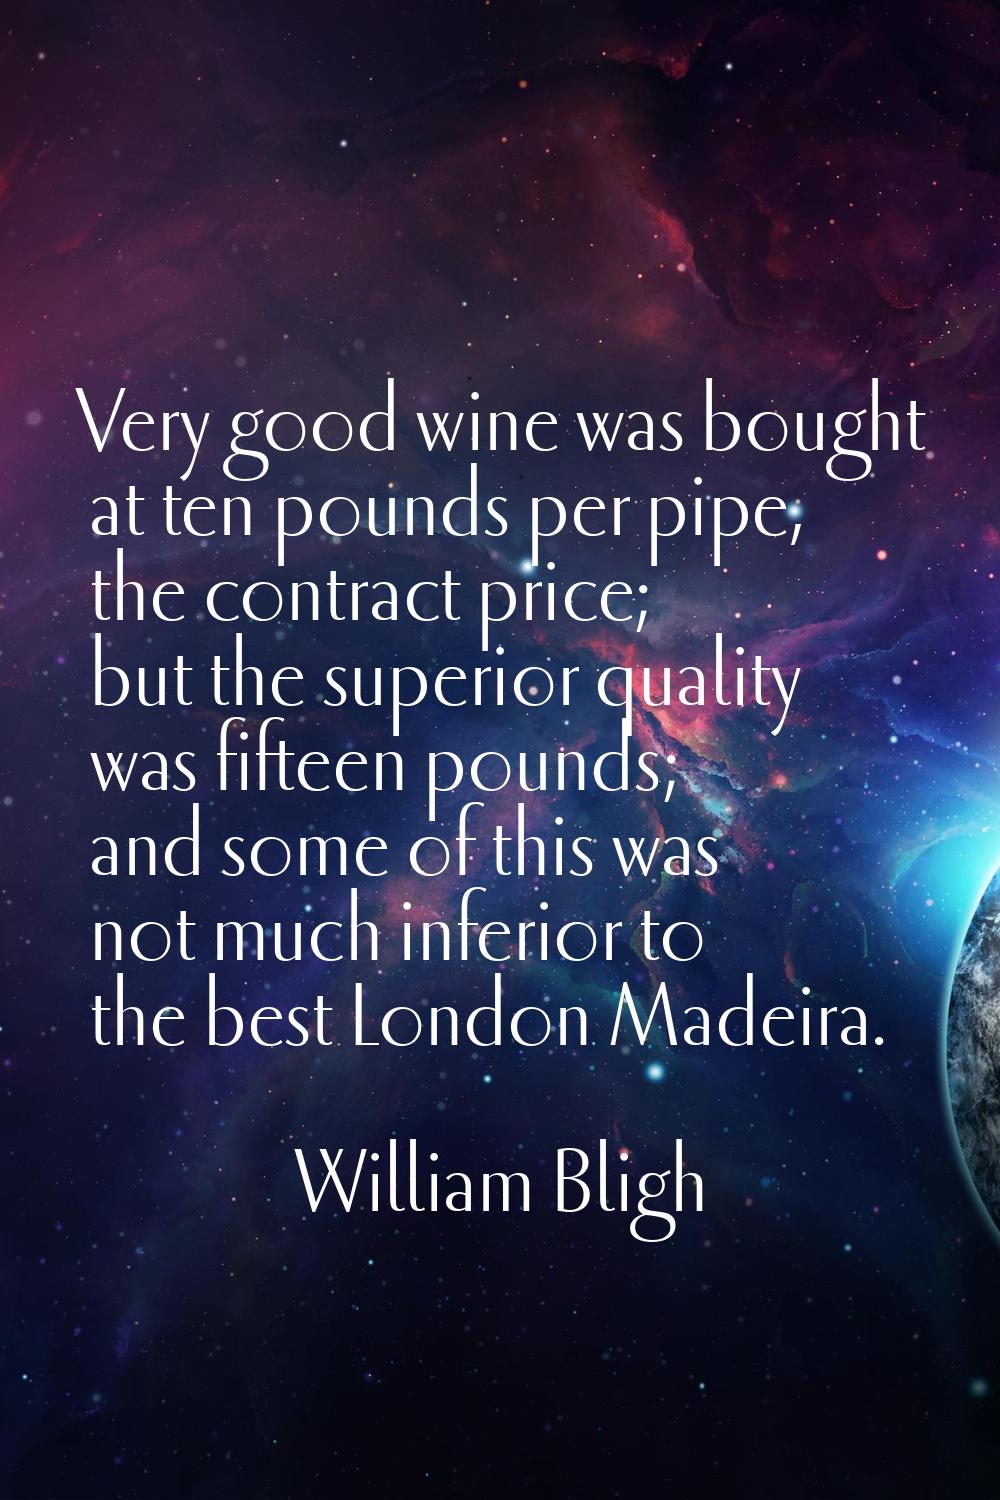 Very good wine was bought at ten pounds per pipe, the contract price; but the superior quality was 